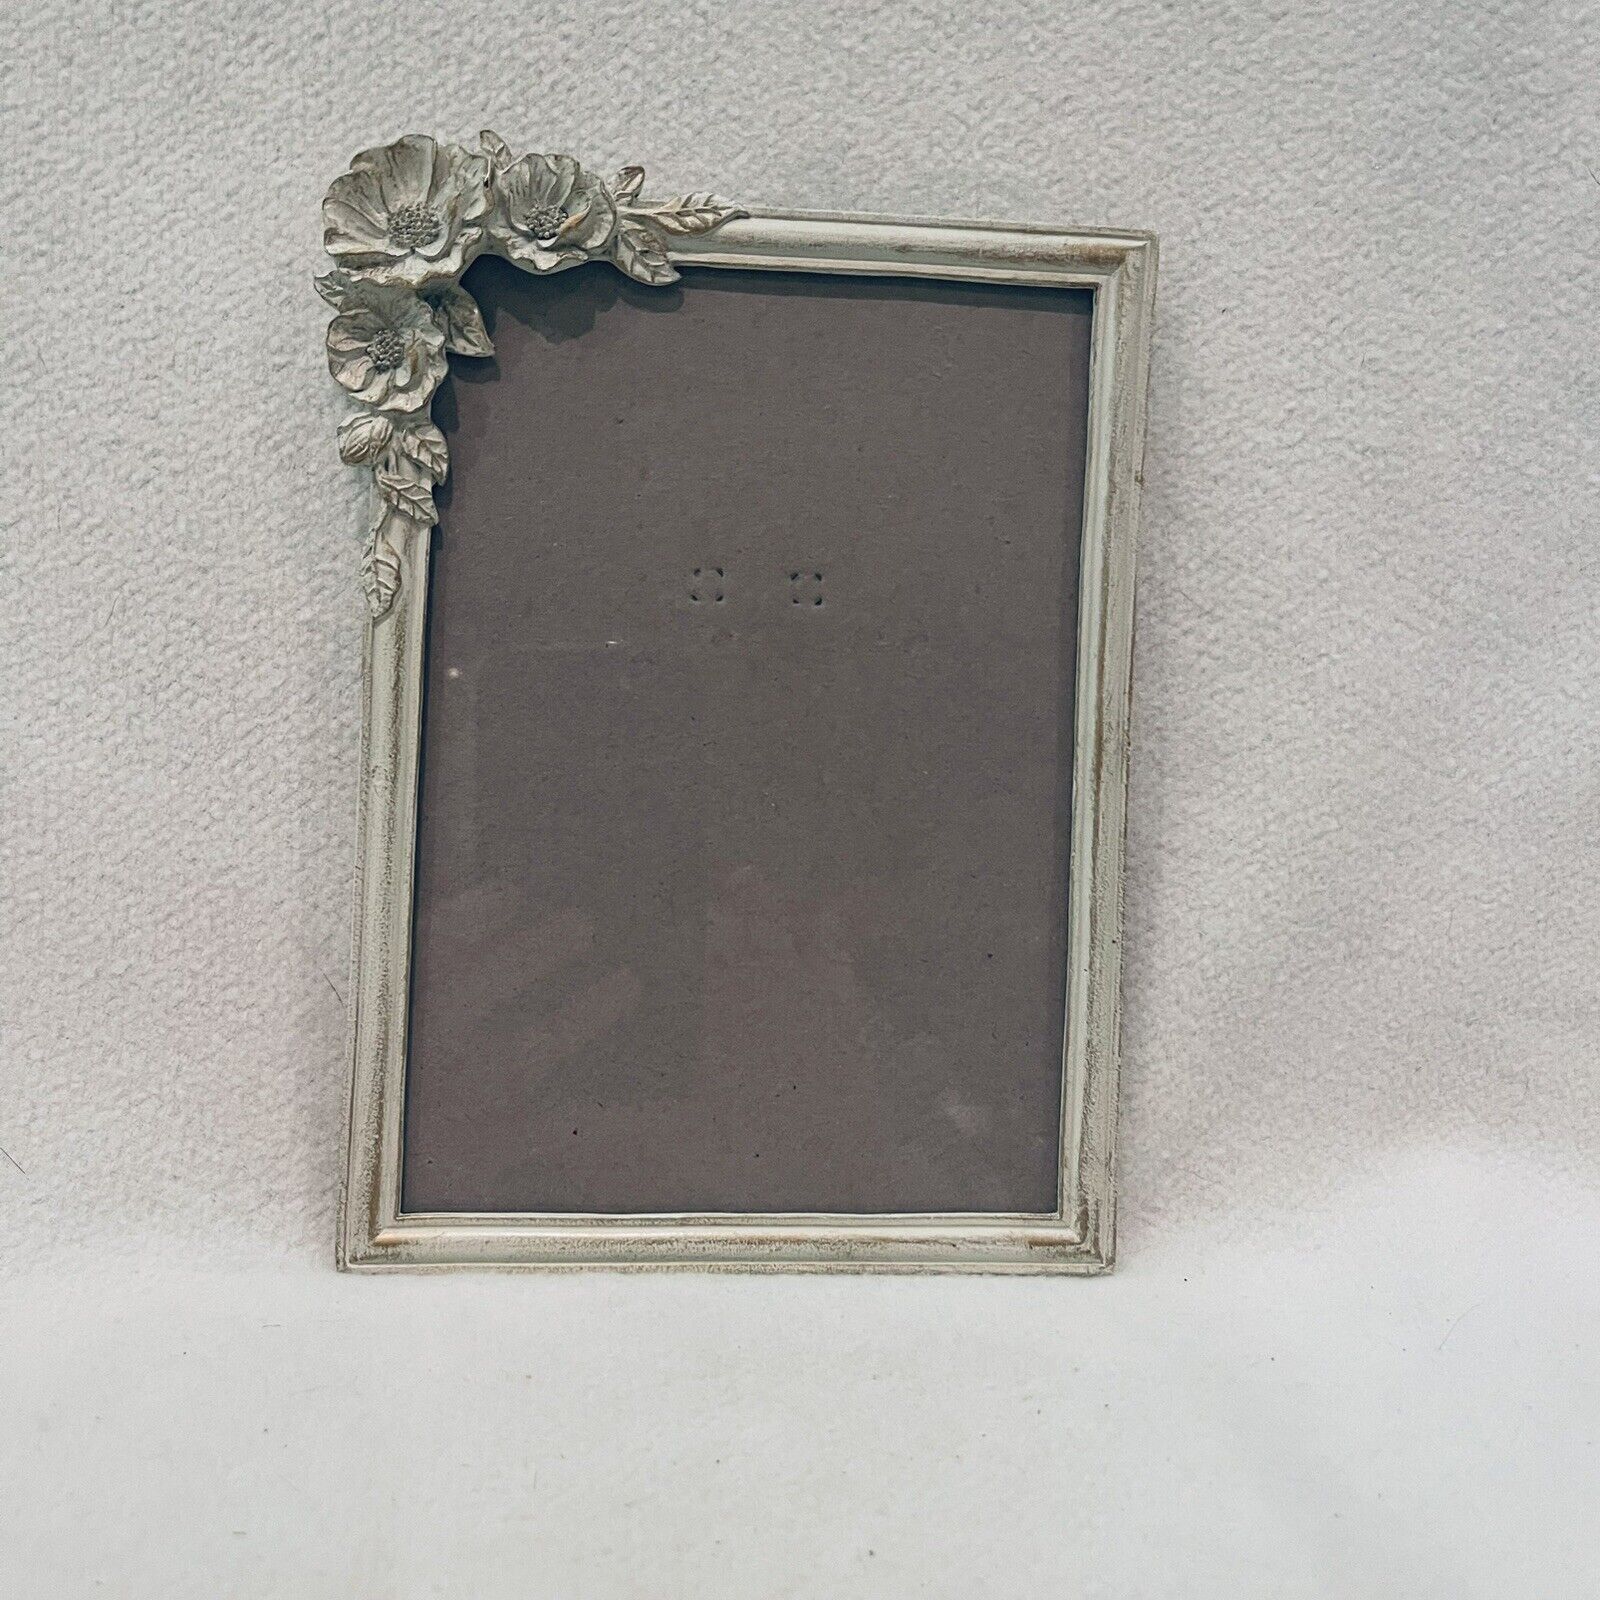 Vintage White And Gold Photo Frame With Flowers Nicole Miller 5”x7”